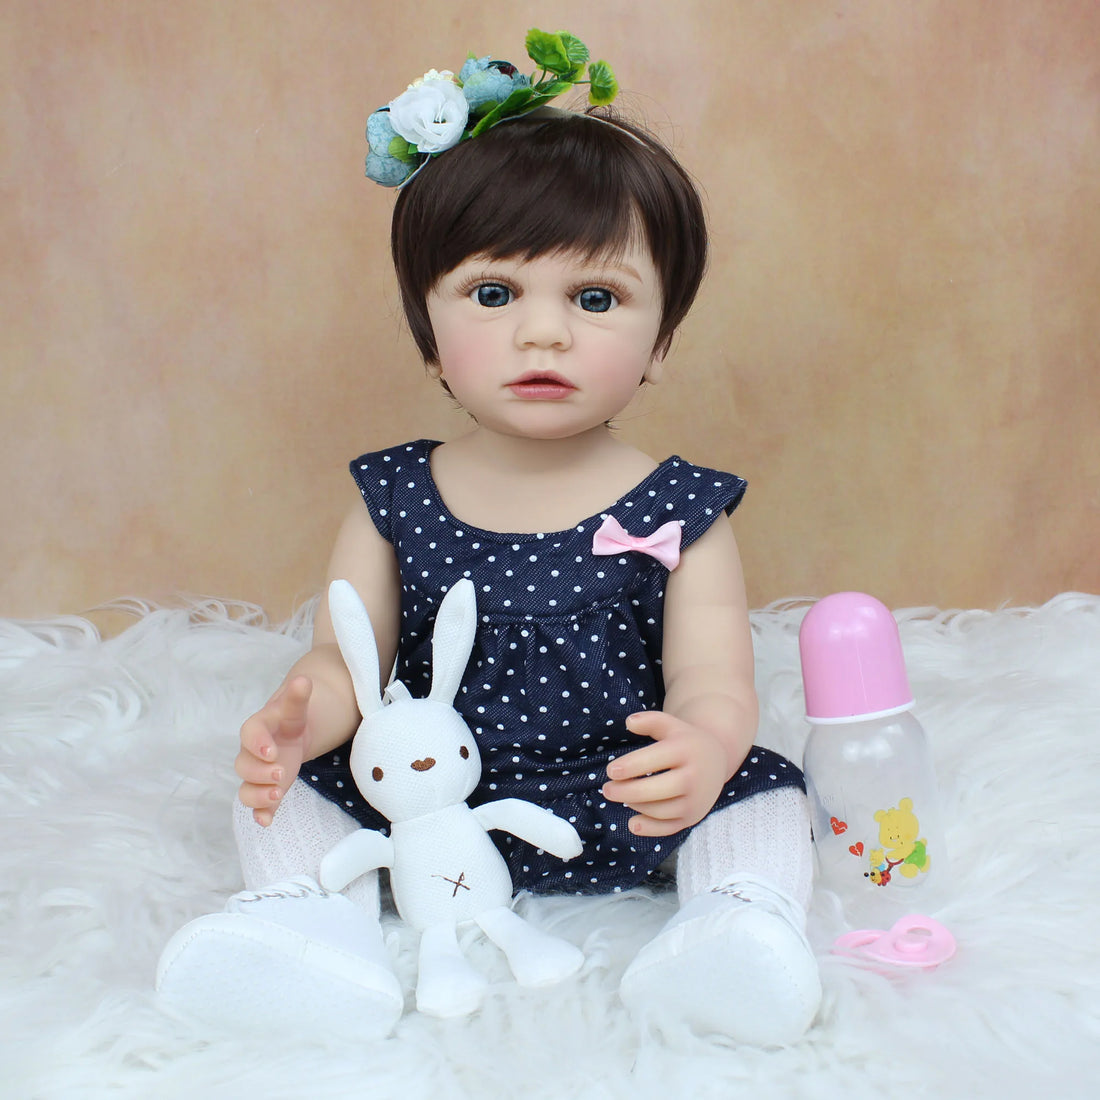 Full Body Silicone Baby Reborn Doll Realistic Soft Vinyl Princess Toddler Girl Classic